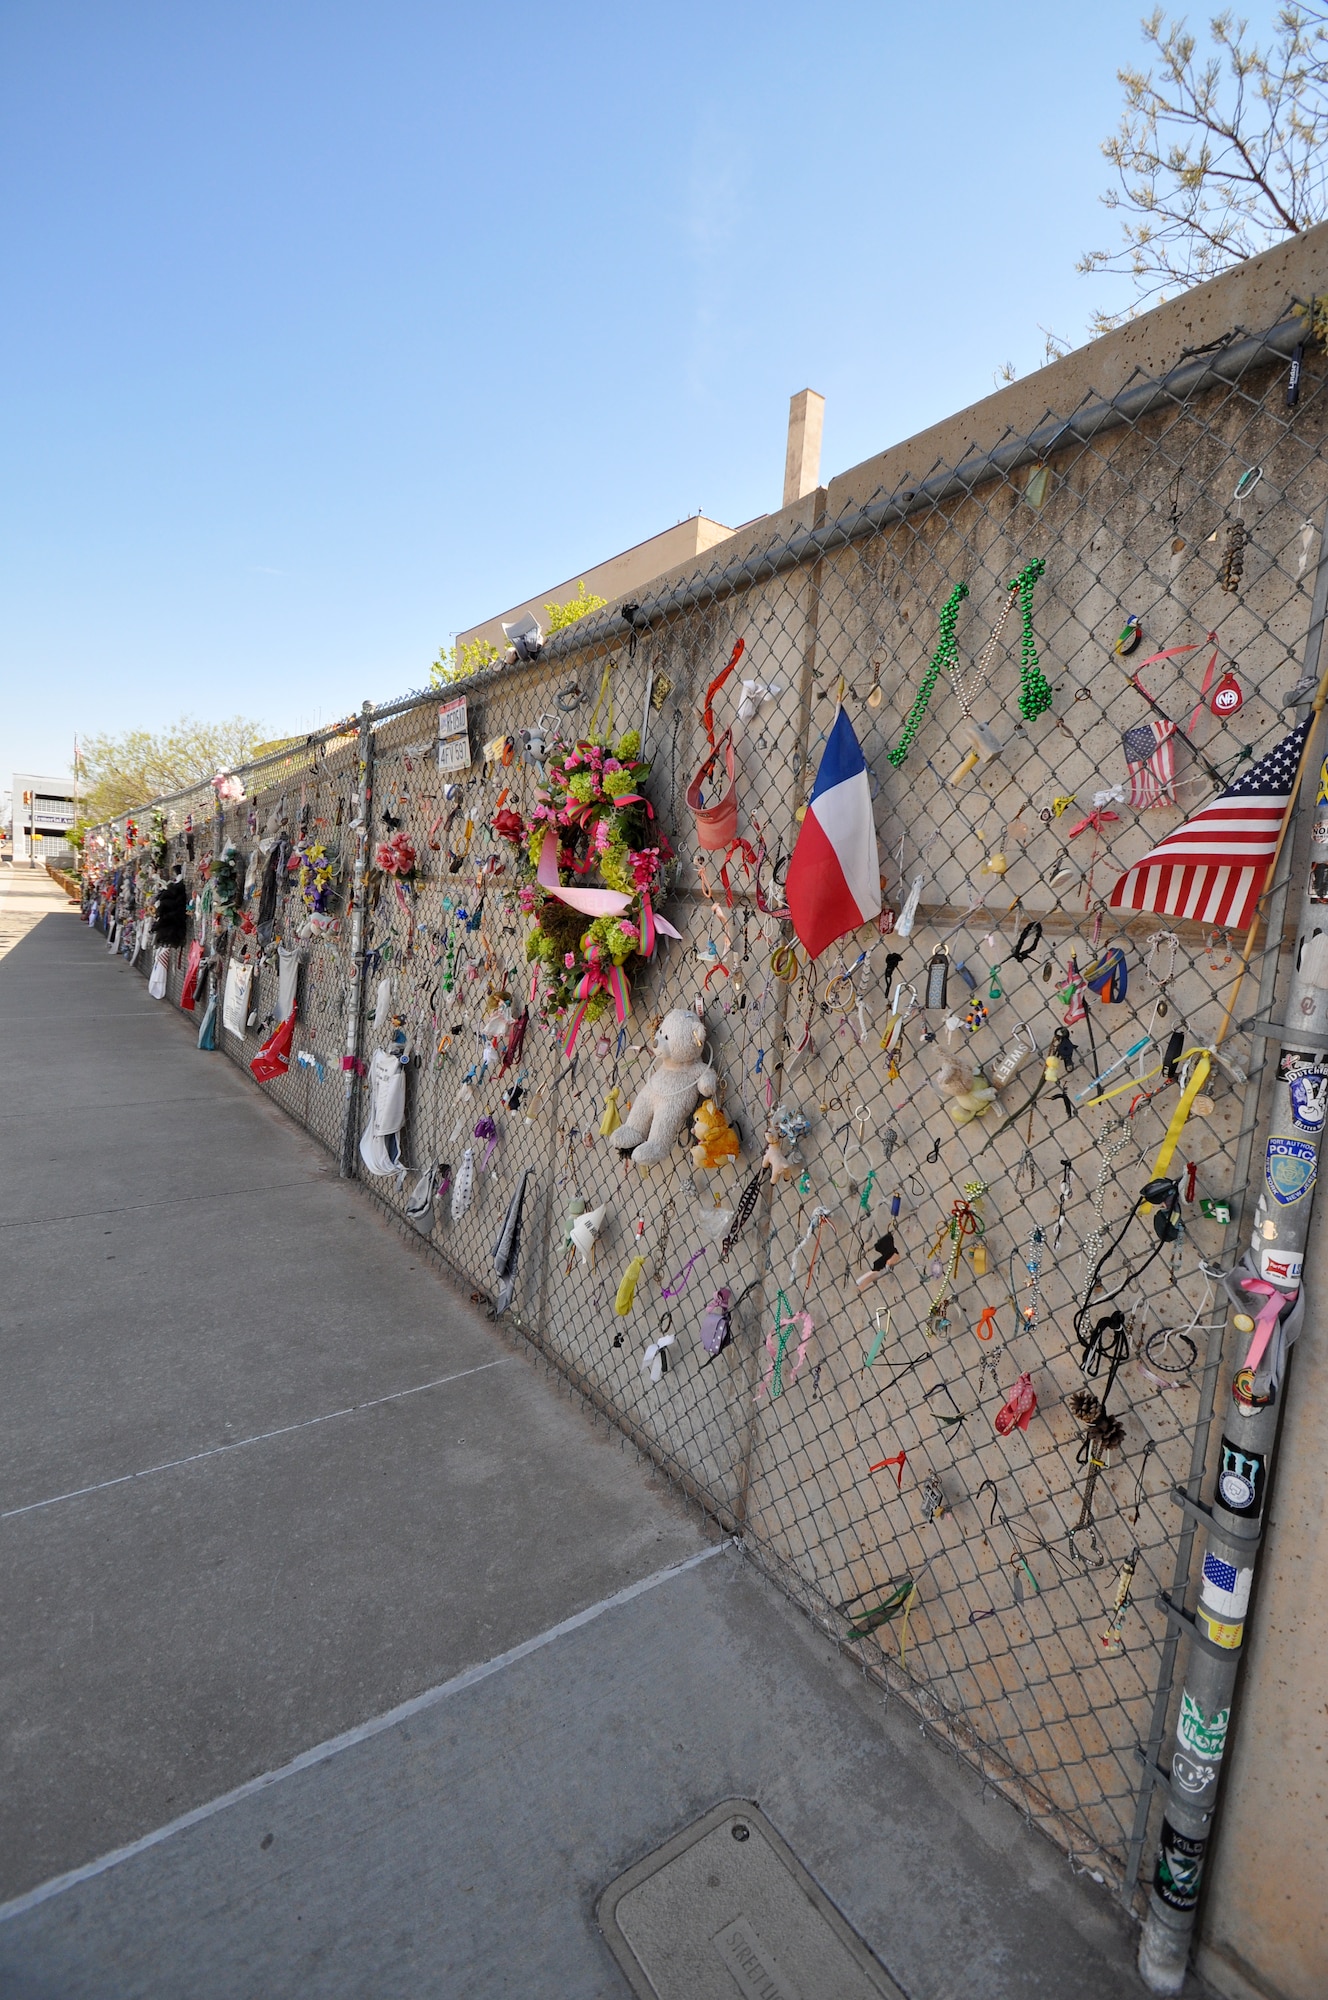 Nineteen years after the bombing of the Alfred P. Murrah Federal Building, the symbolic fence is still a place where family, friends, and visitors come to pay respects to those who perished on the morning of April 19, 1995.  The fence was installed to protect the site of the Murrah Building and almost immediately became a place where people began to leave tokens of love and hope.  According the the Oklahoma City National Memorial website, these tokens now total more than 60,000 and are collected and preserved in the museum archives.  More than 200 feet of the original fence stands to give future generations their chance to leave tokens of remembrance.  (U.S. Air Force photo/Senior Airman Mark Hybers)